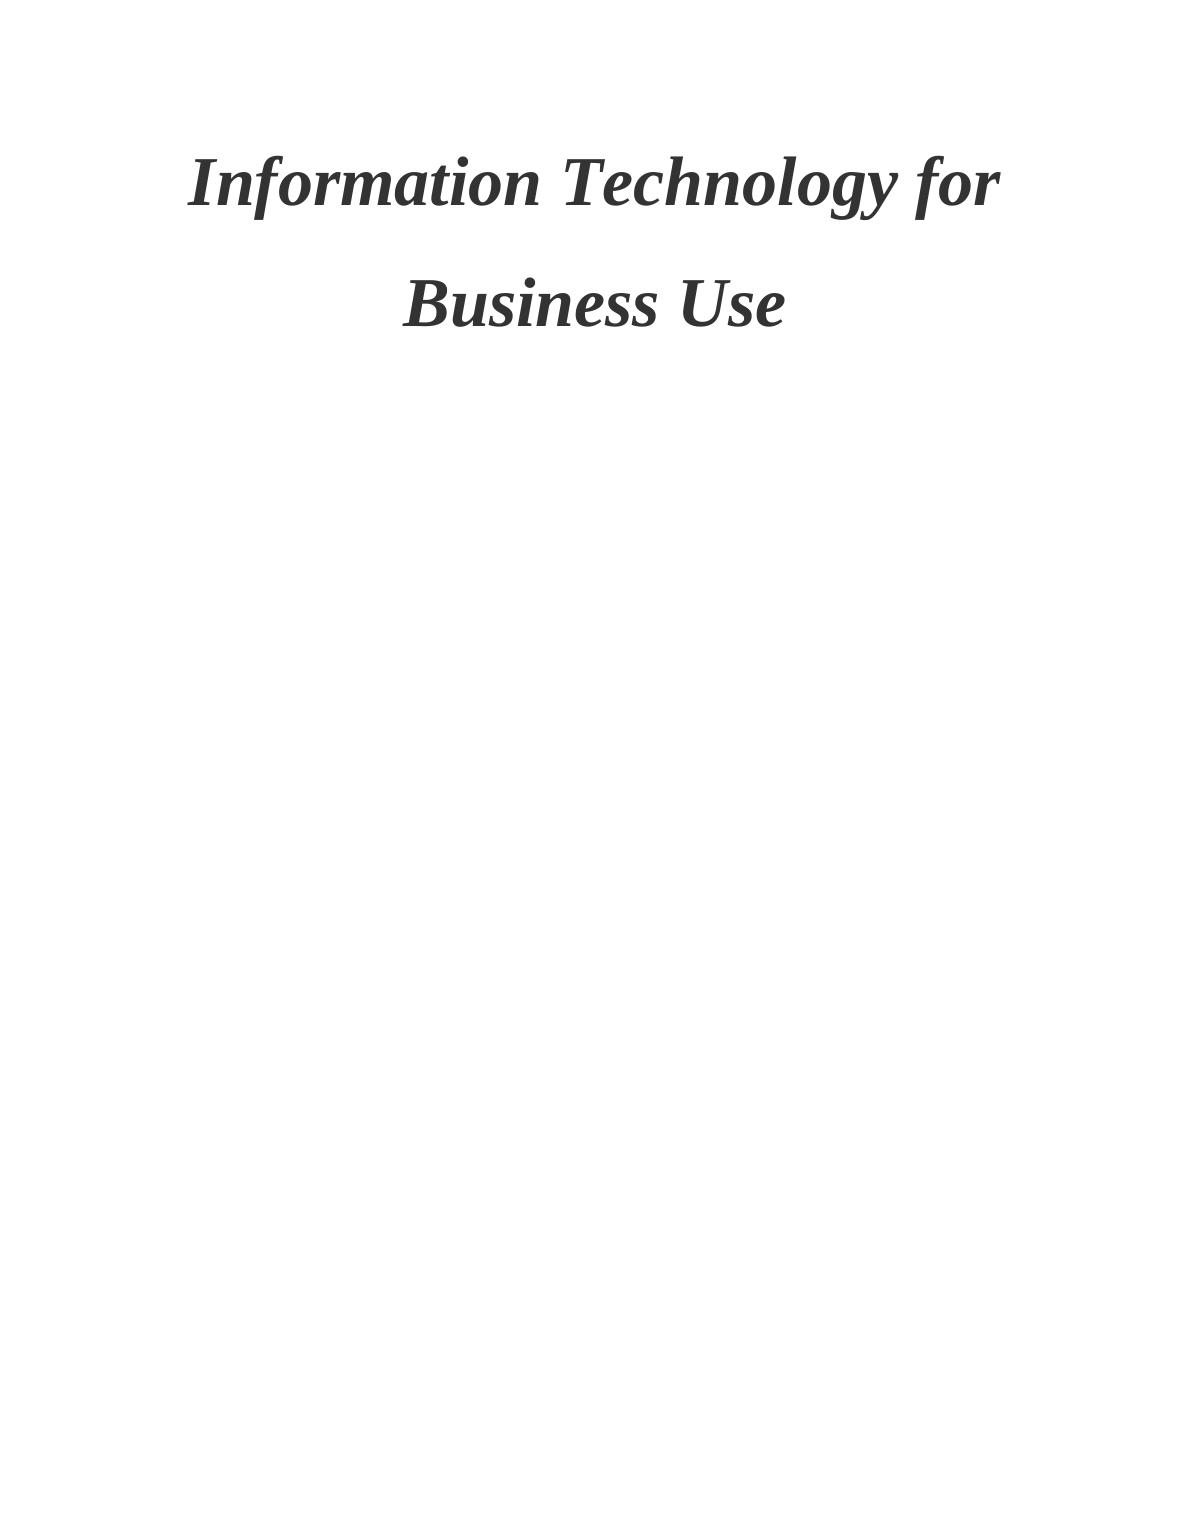 Information Technology for Business : Assignment_1